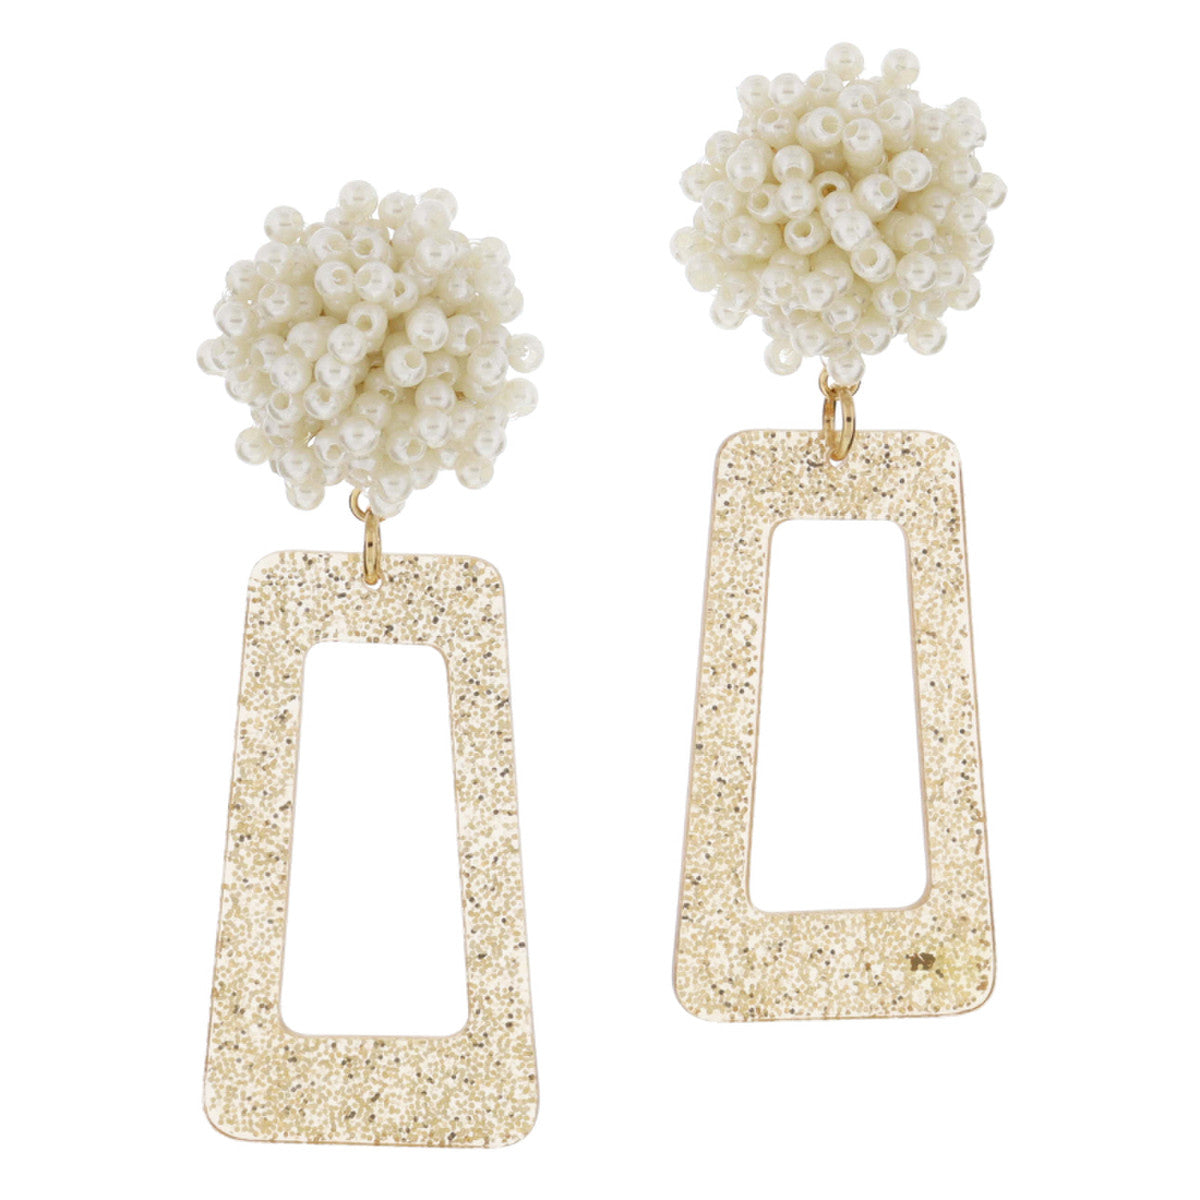 MINI PEARL POM POST WITH ROSE GOLD GLITTER RESIN OPEN TRAPEZOID EARRINGS